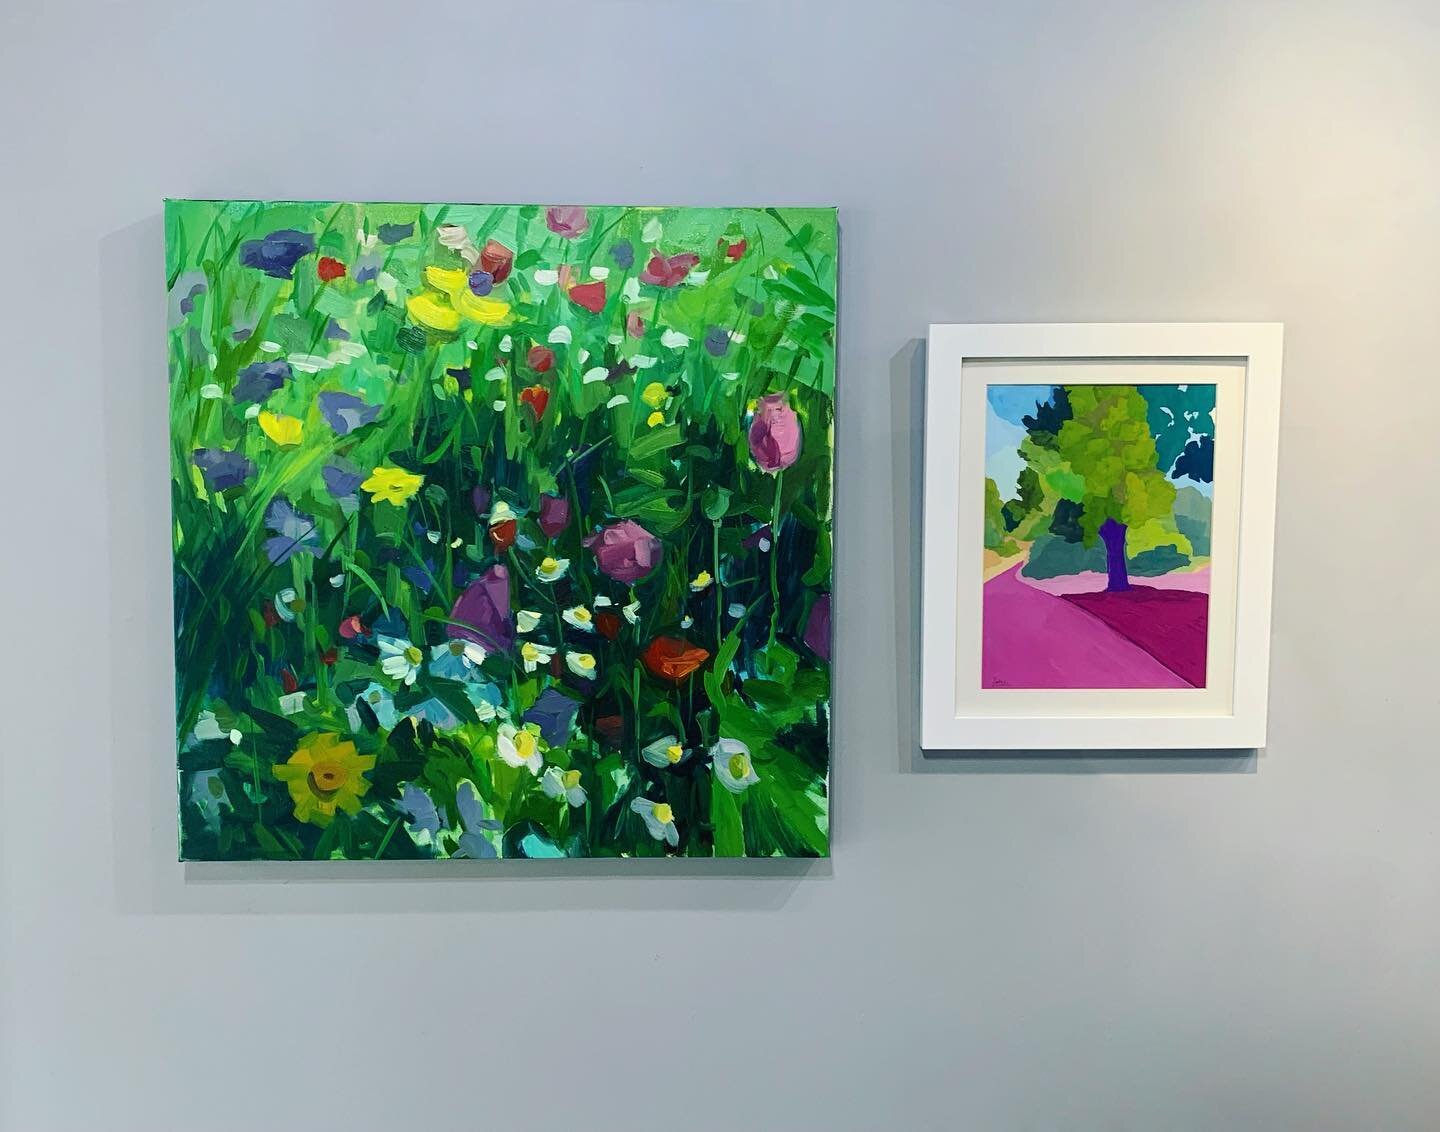 Spring is in the air, my favorite time of year, and I&rsquo;m happy to be part of the group exhibition Perpetual Spring with @vanessaalyssemichalak and @sashaparfenova opening today at Michalak Fine Art! 🌺🌱✨

The exhibition with be on view through 